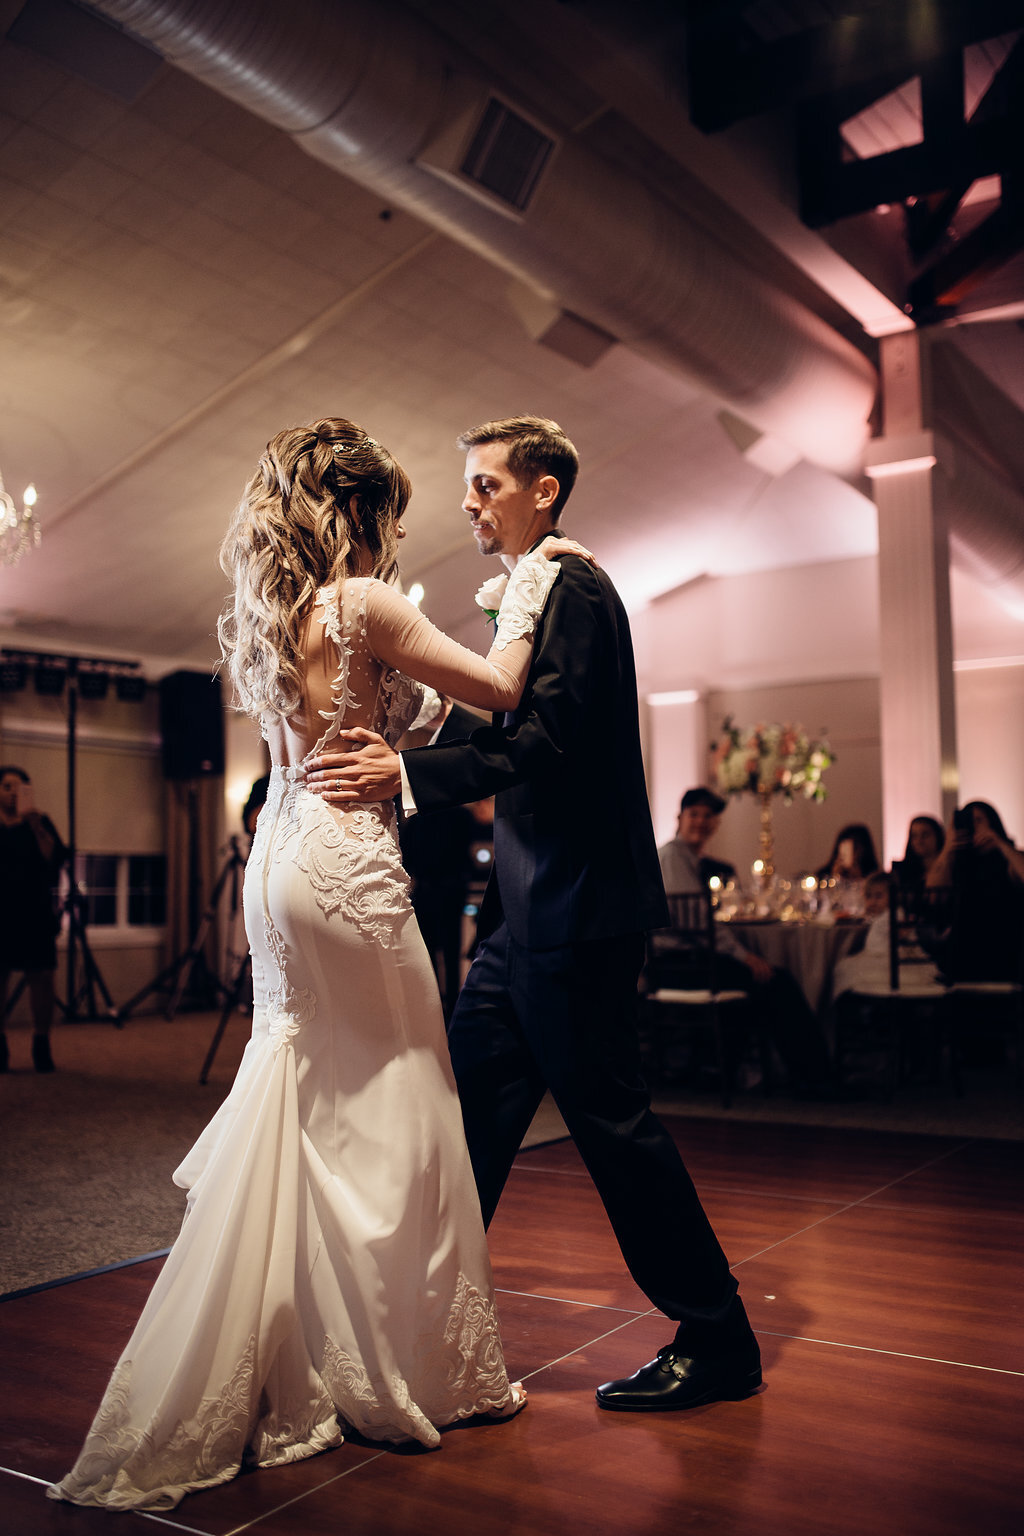 Wedding Photograph Of Bride And Groom Waltzing Los Angeles